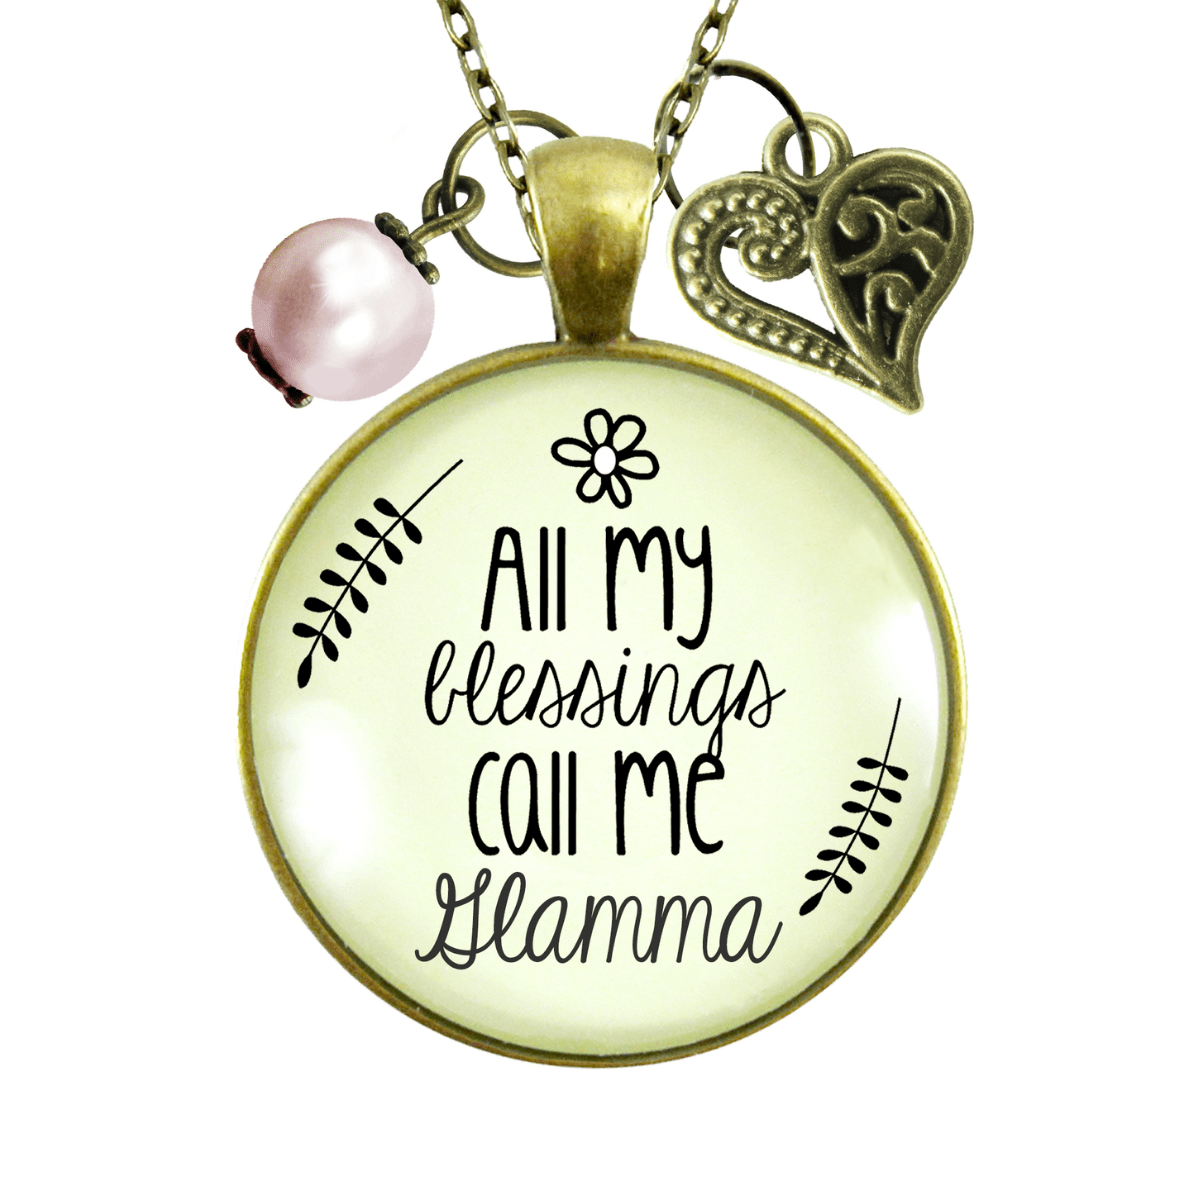 Gutsy Goodness Glamma Necklace All My Blessings Young At Heart Grandma Family Gift Jewelry - Gutsy Goodness;Glamma Necklace All My Blessings Young At Heart Grandma Family Gift Jewelry - Gutsy Goodness Handmade Jewelry Gifts